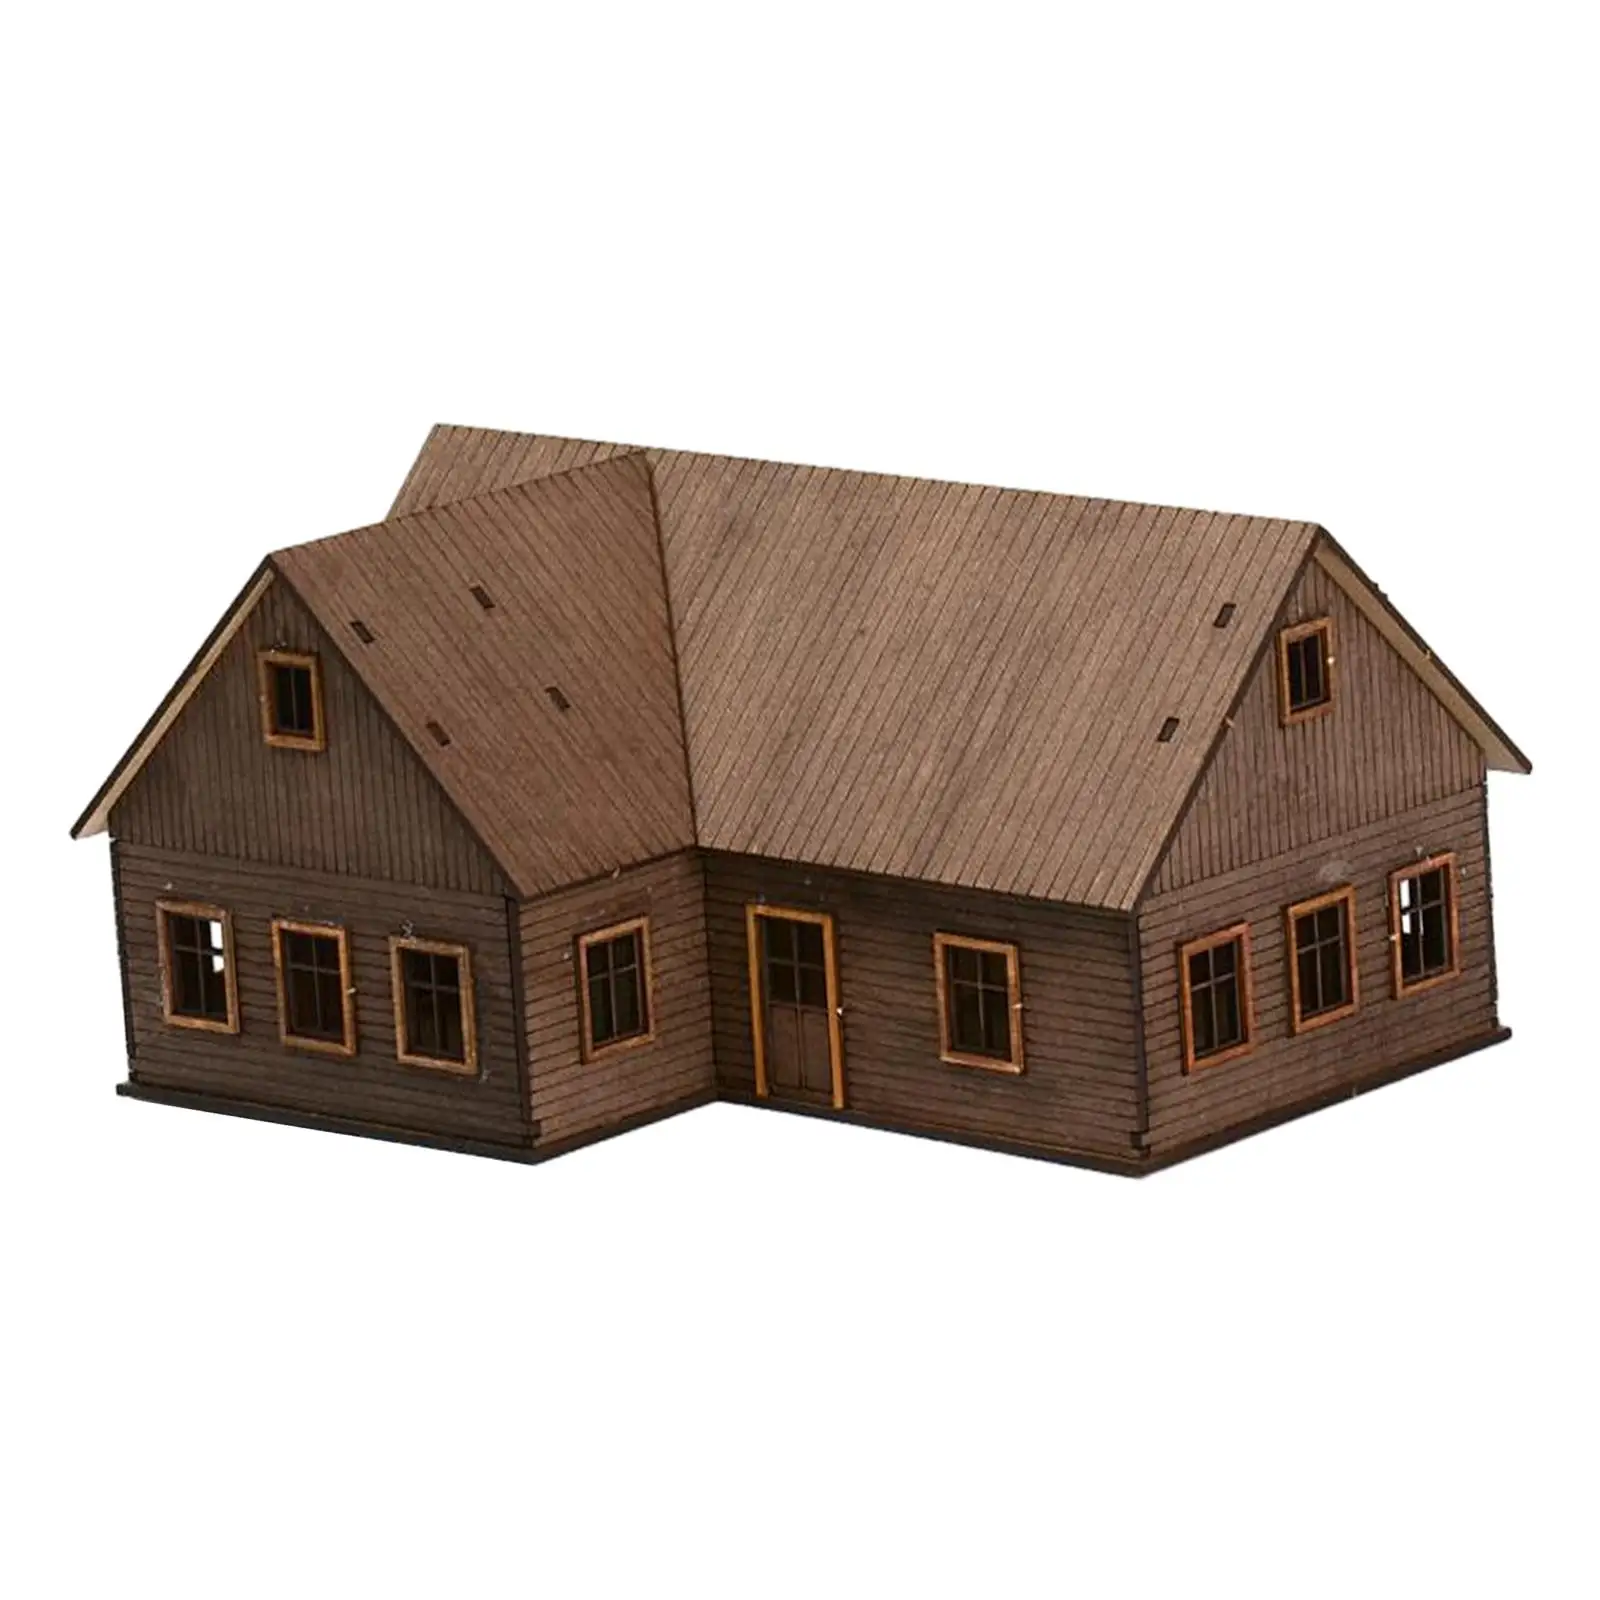 1/72 European Building Model Collection Ornaments 3D Puzzles Scenery Supplies for Diorama Model Railway Sand Table Layout